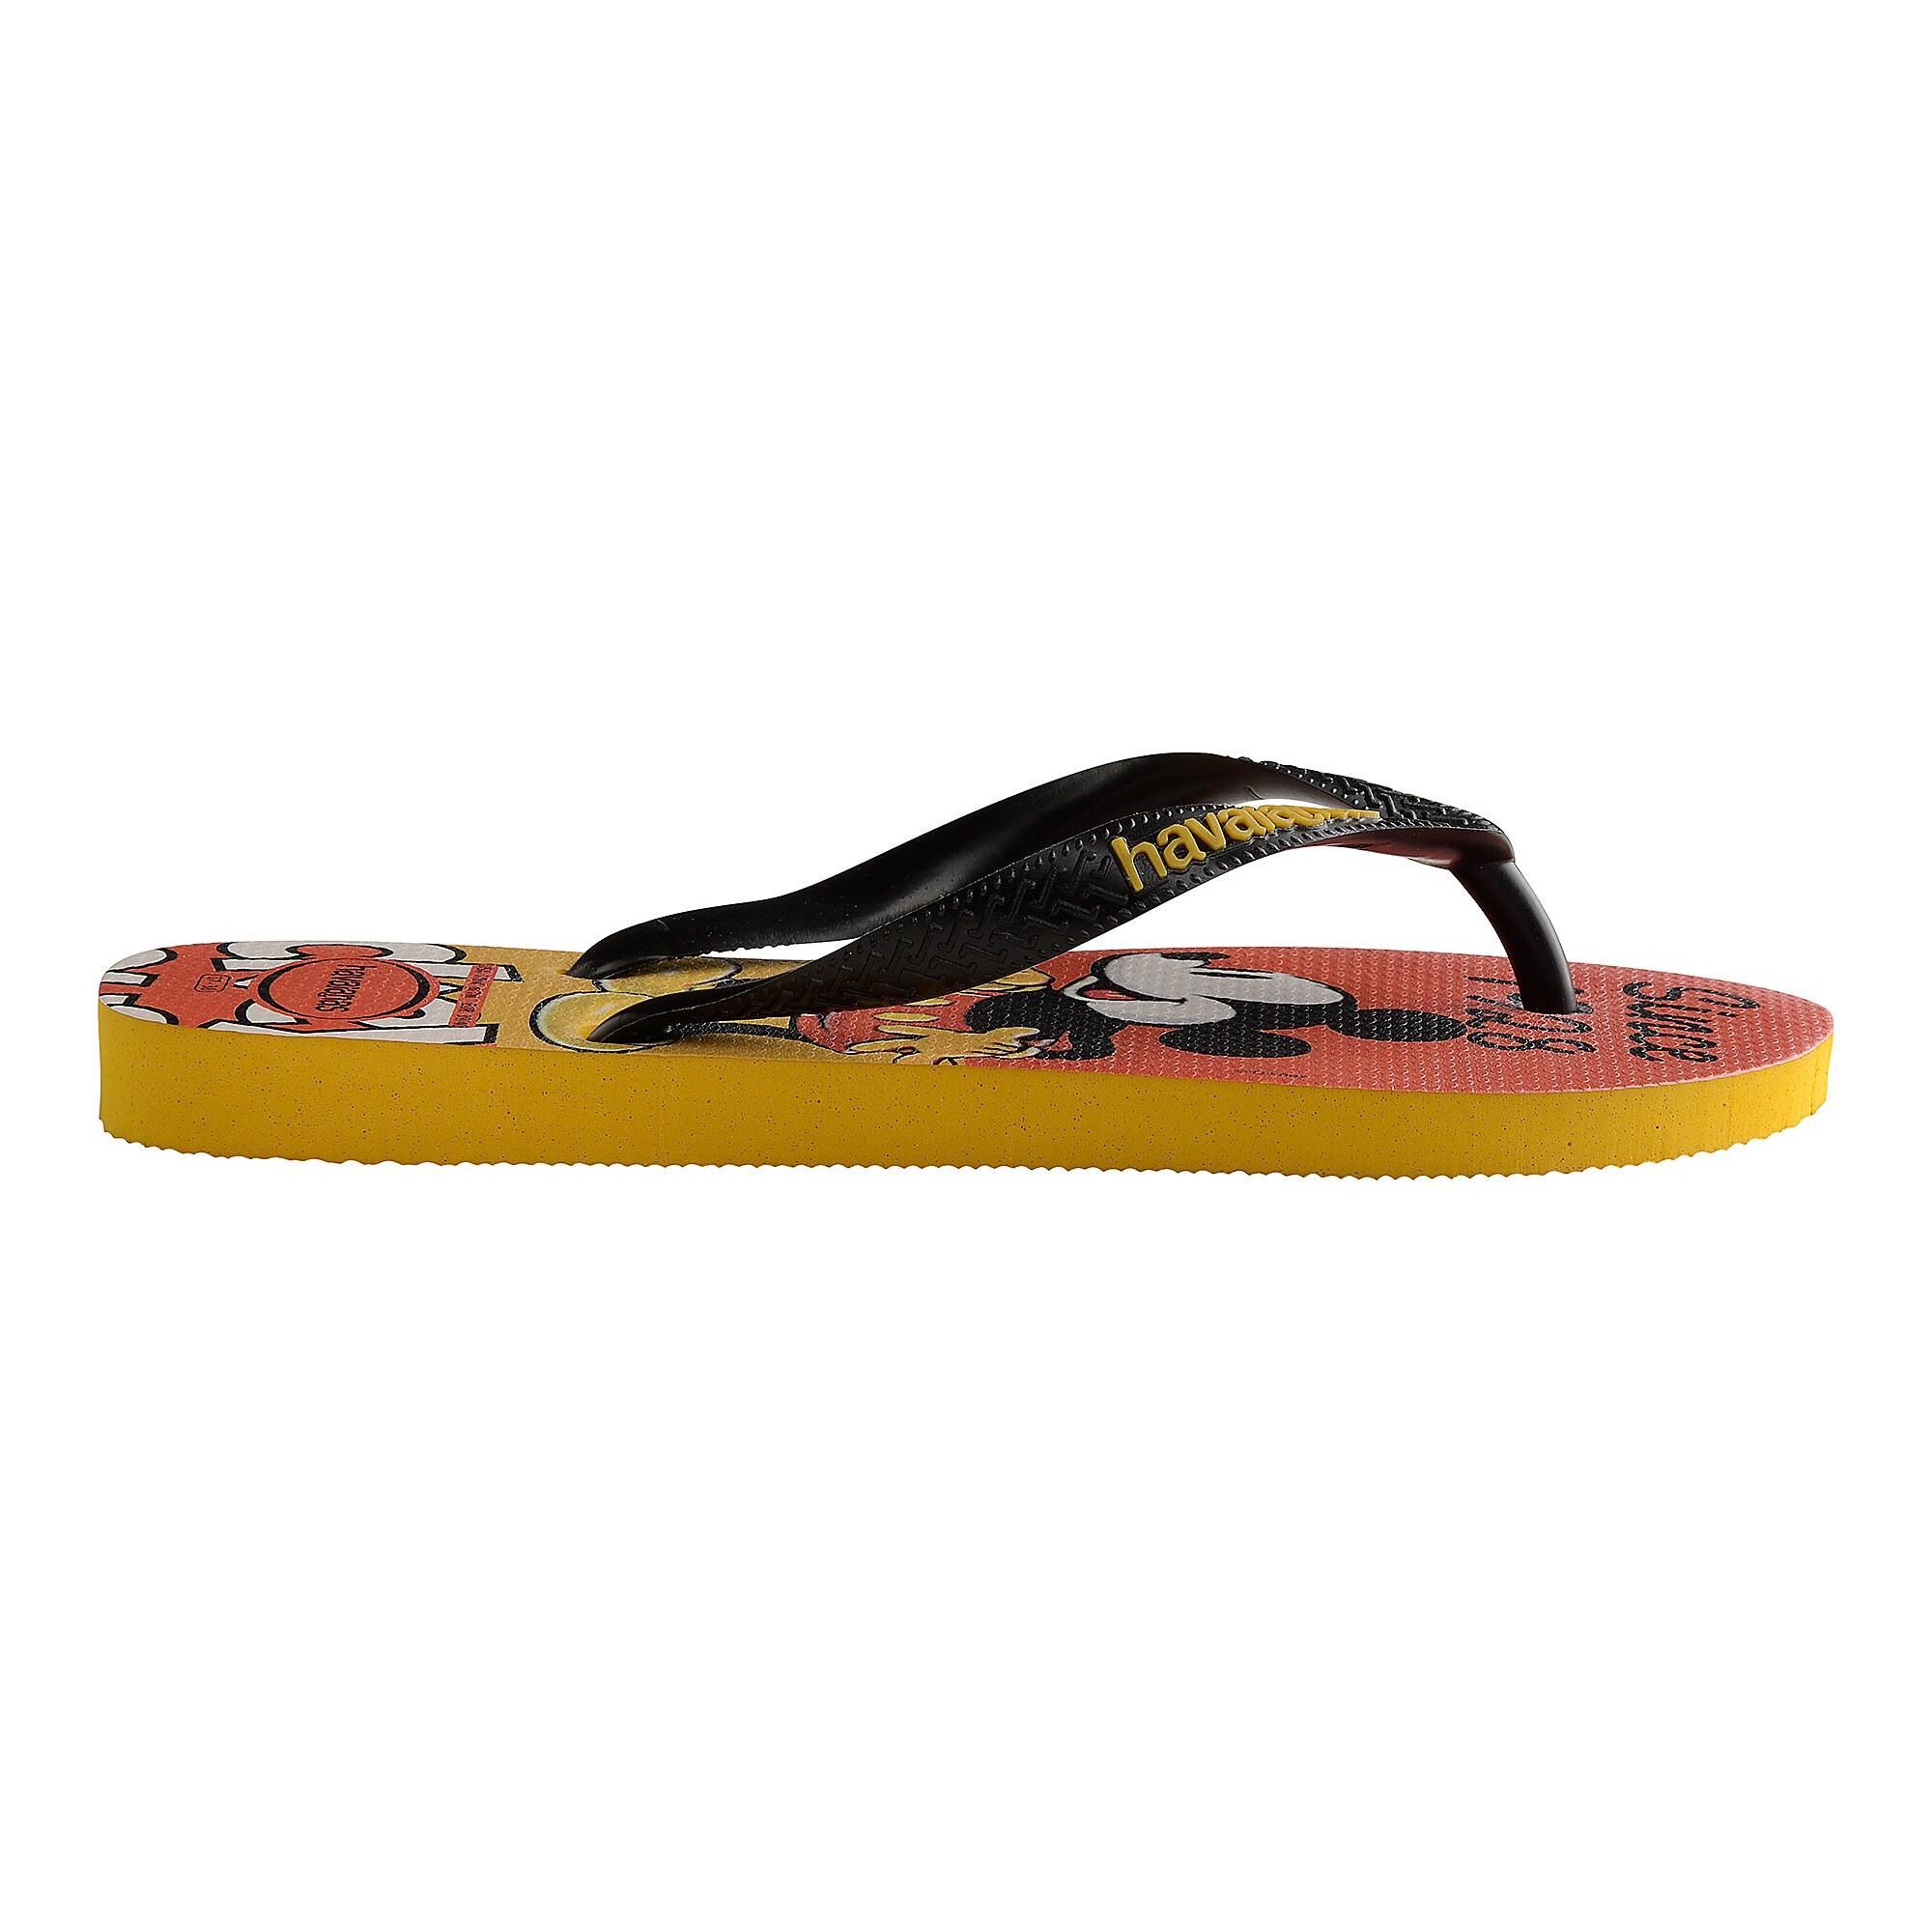 Mickey Mouse Flip Flops for Men by Havaianas